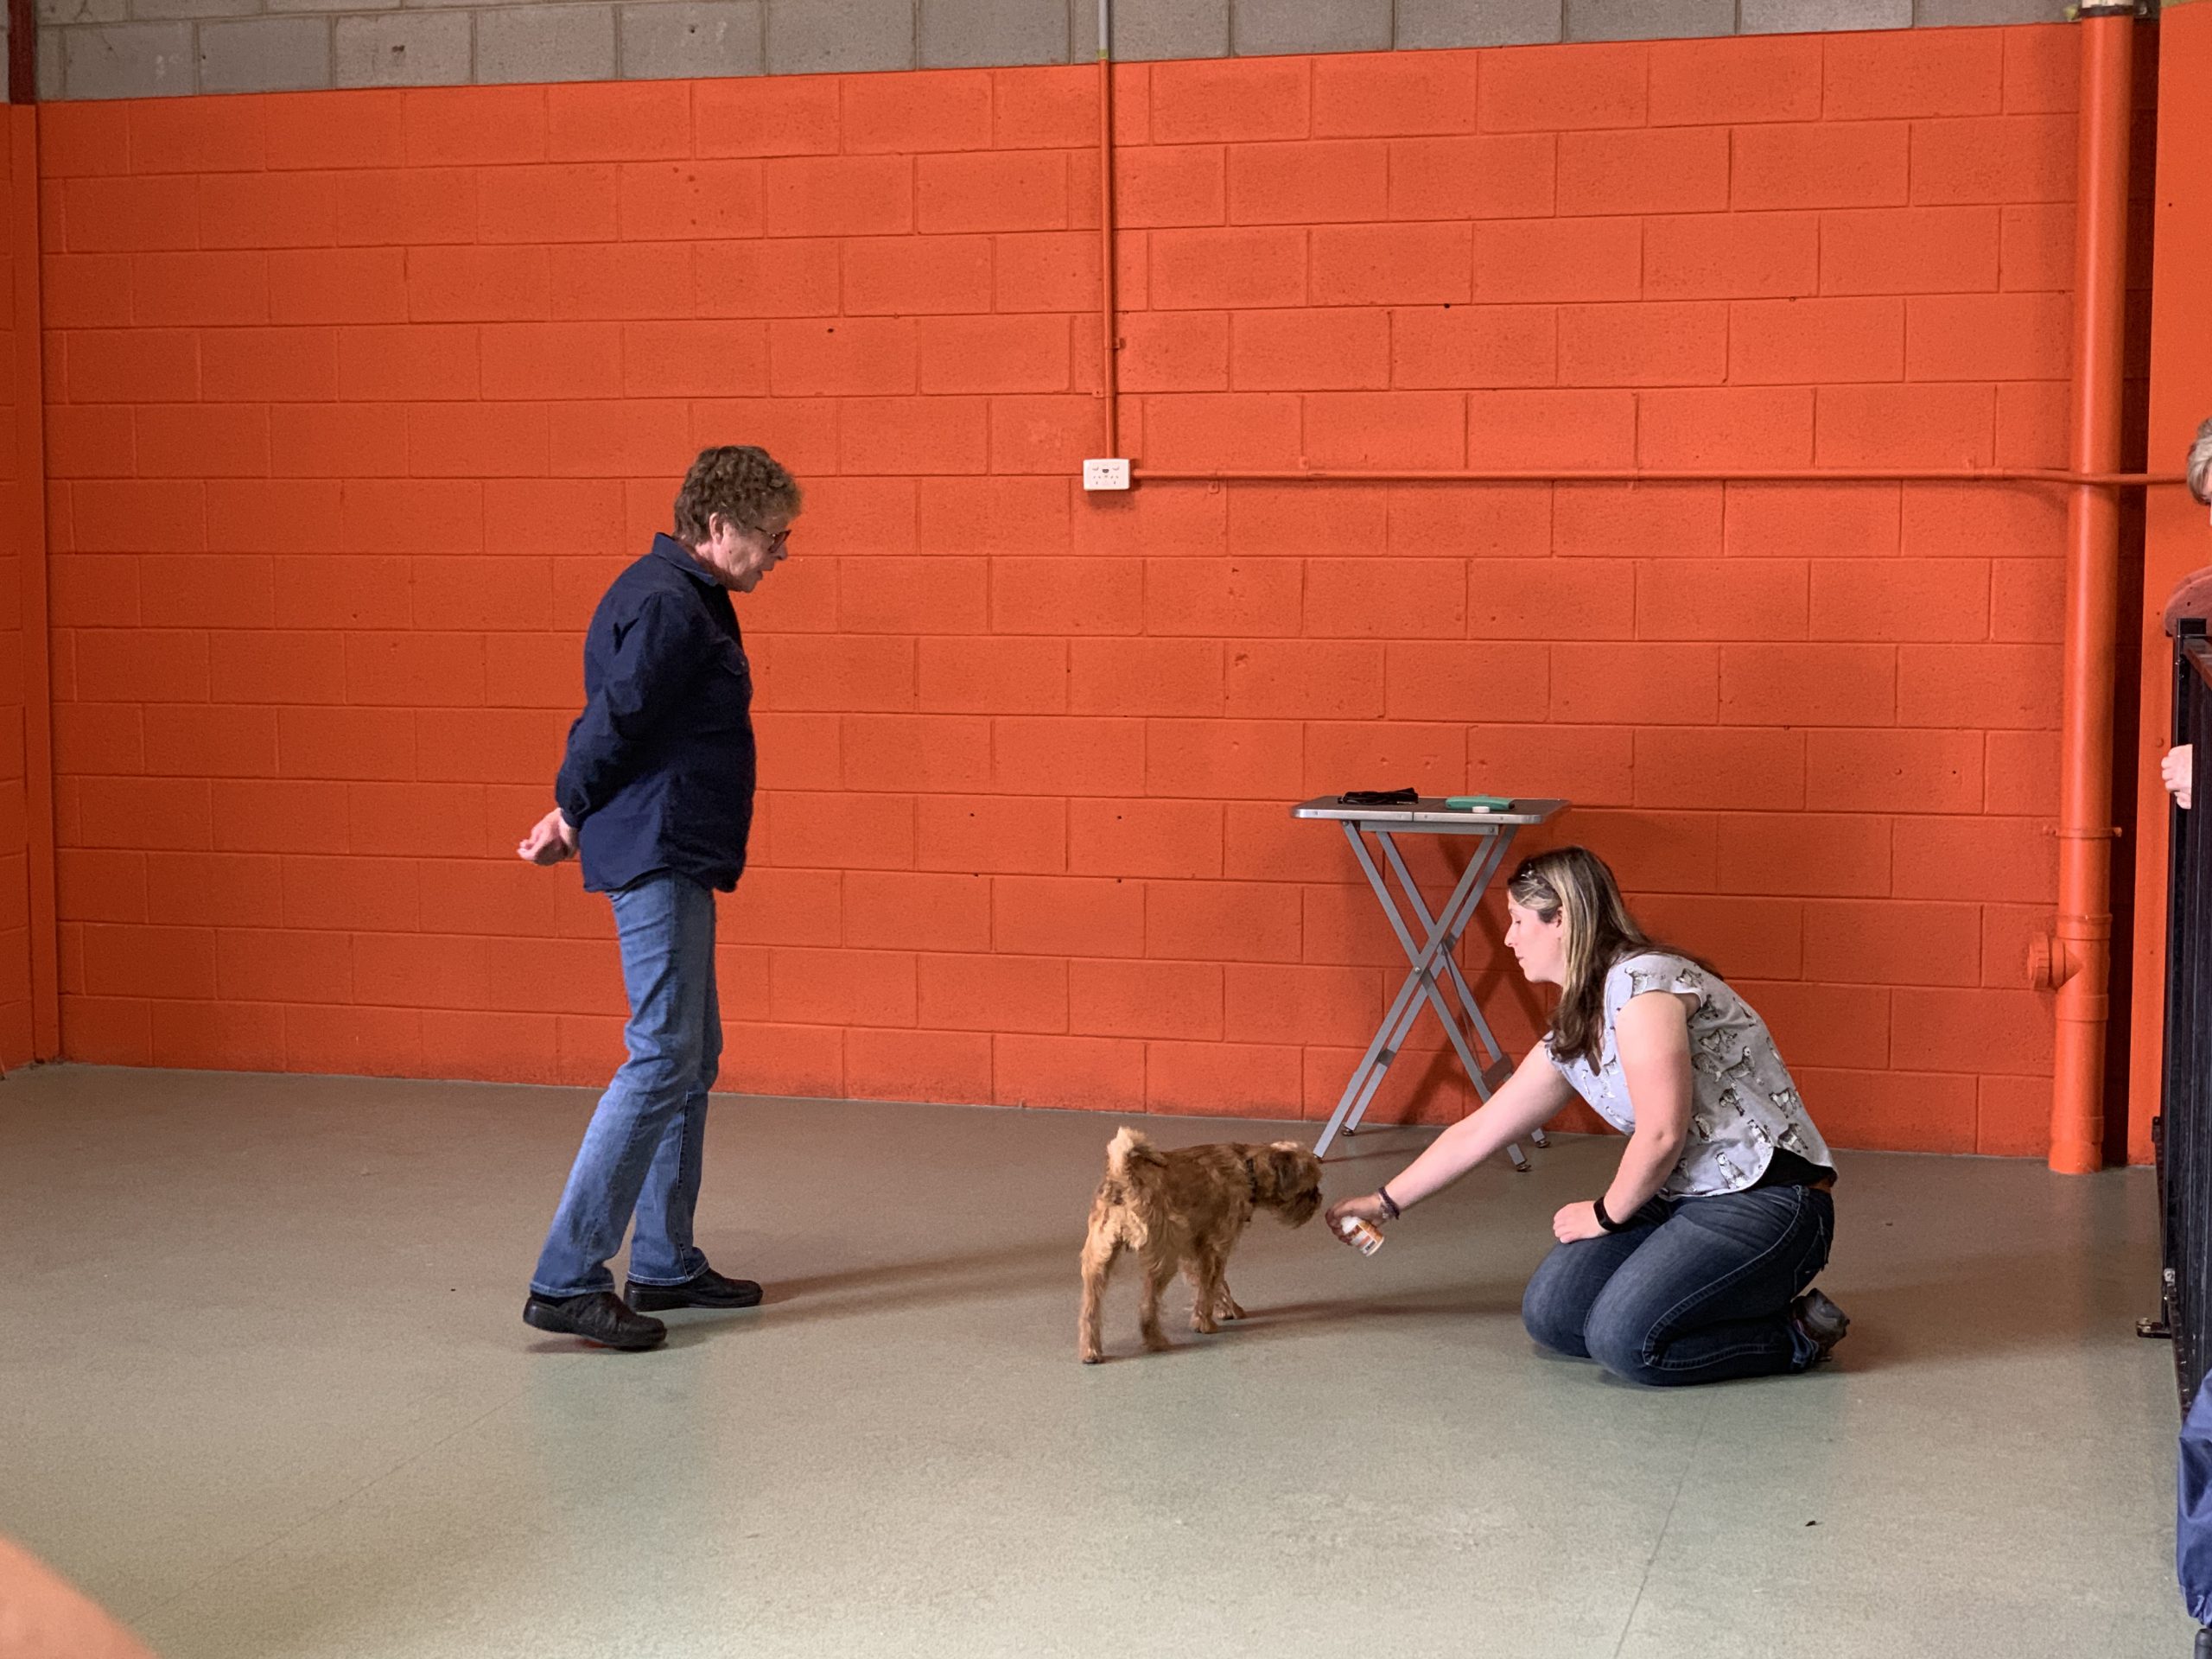 Female trainer in a grey top kneeling on floor with small brown dog, giving it a treat. Woman in dark blue long sleeve shirt and jeans watches, standing nearby.